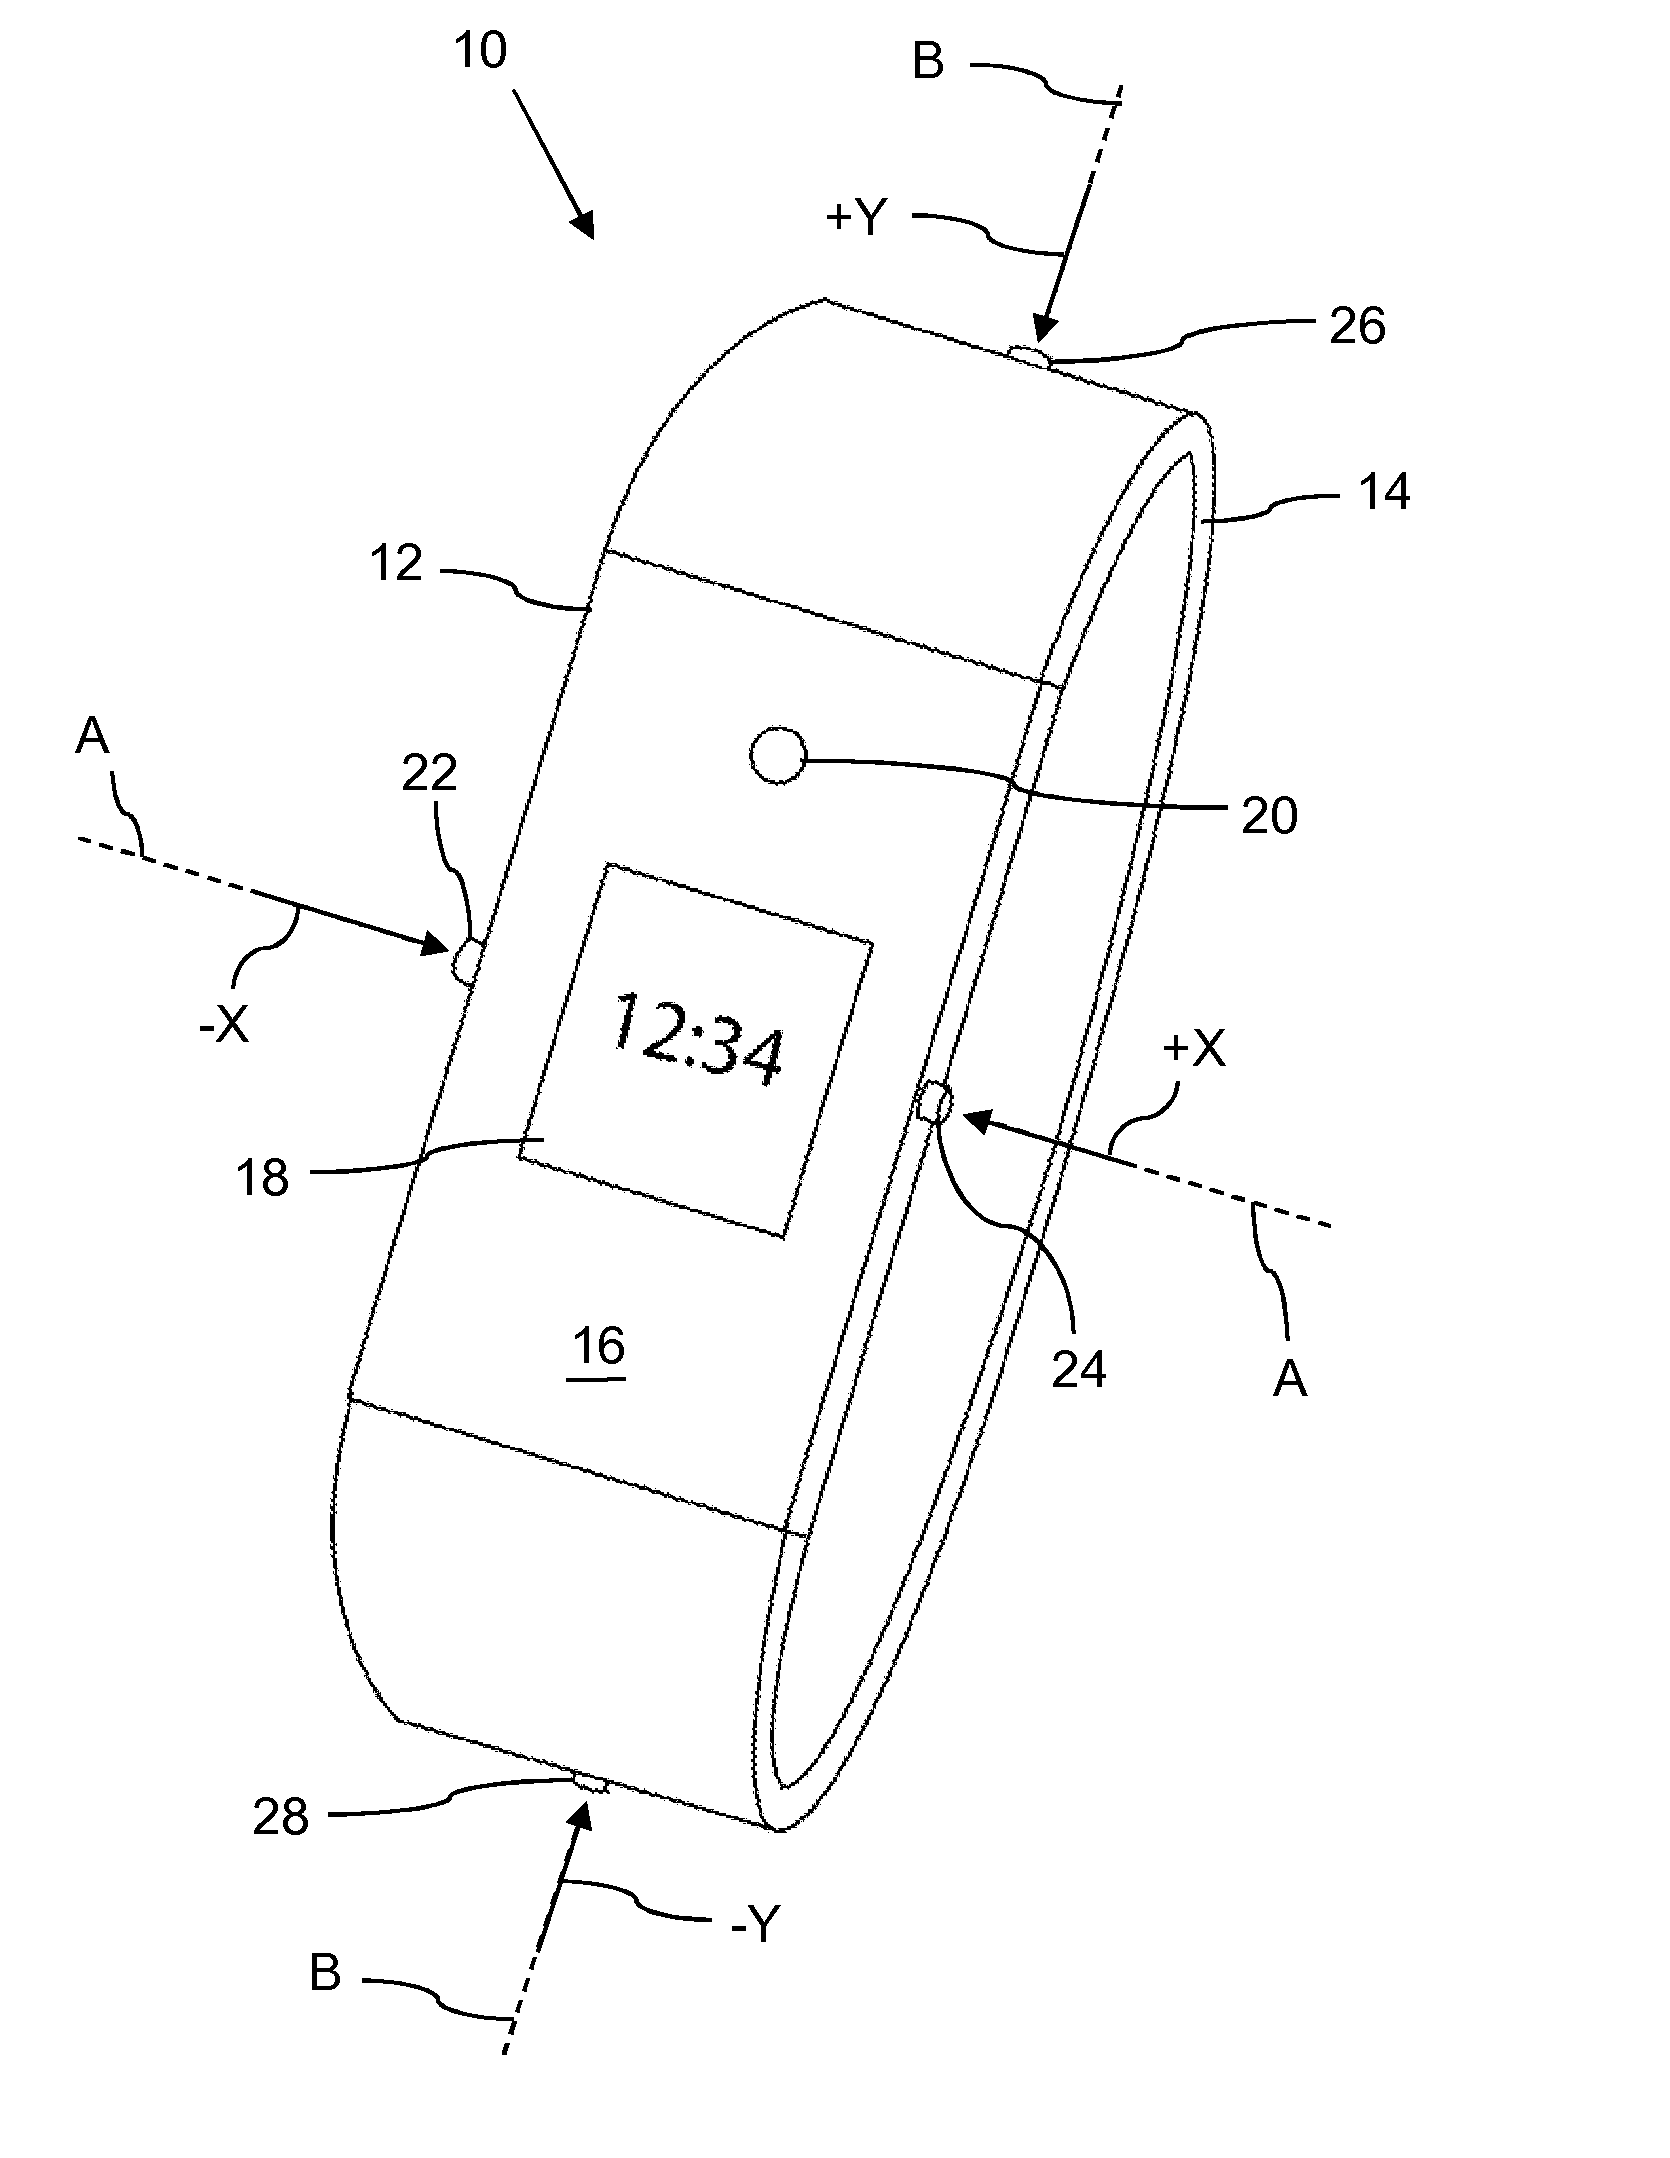 Wrist-worn device for sensing ambient light intensity